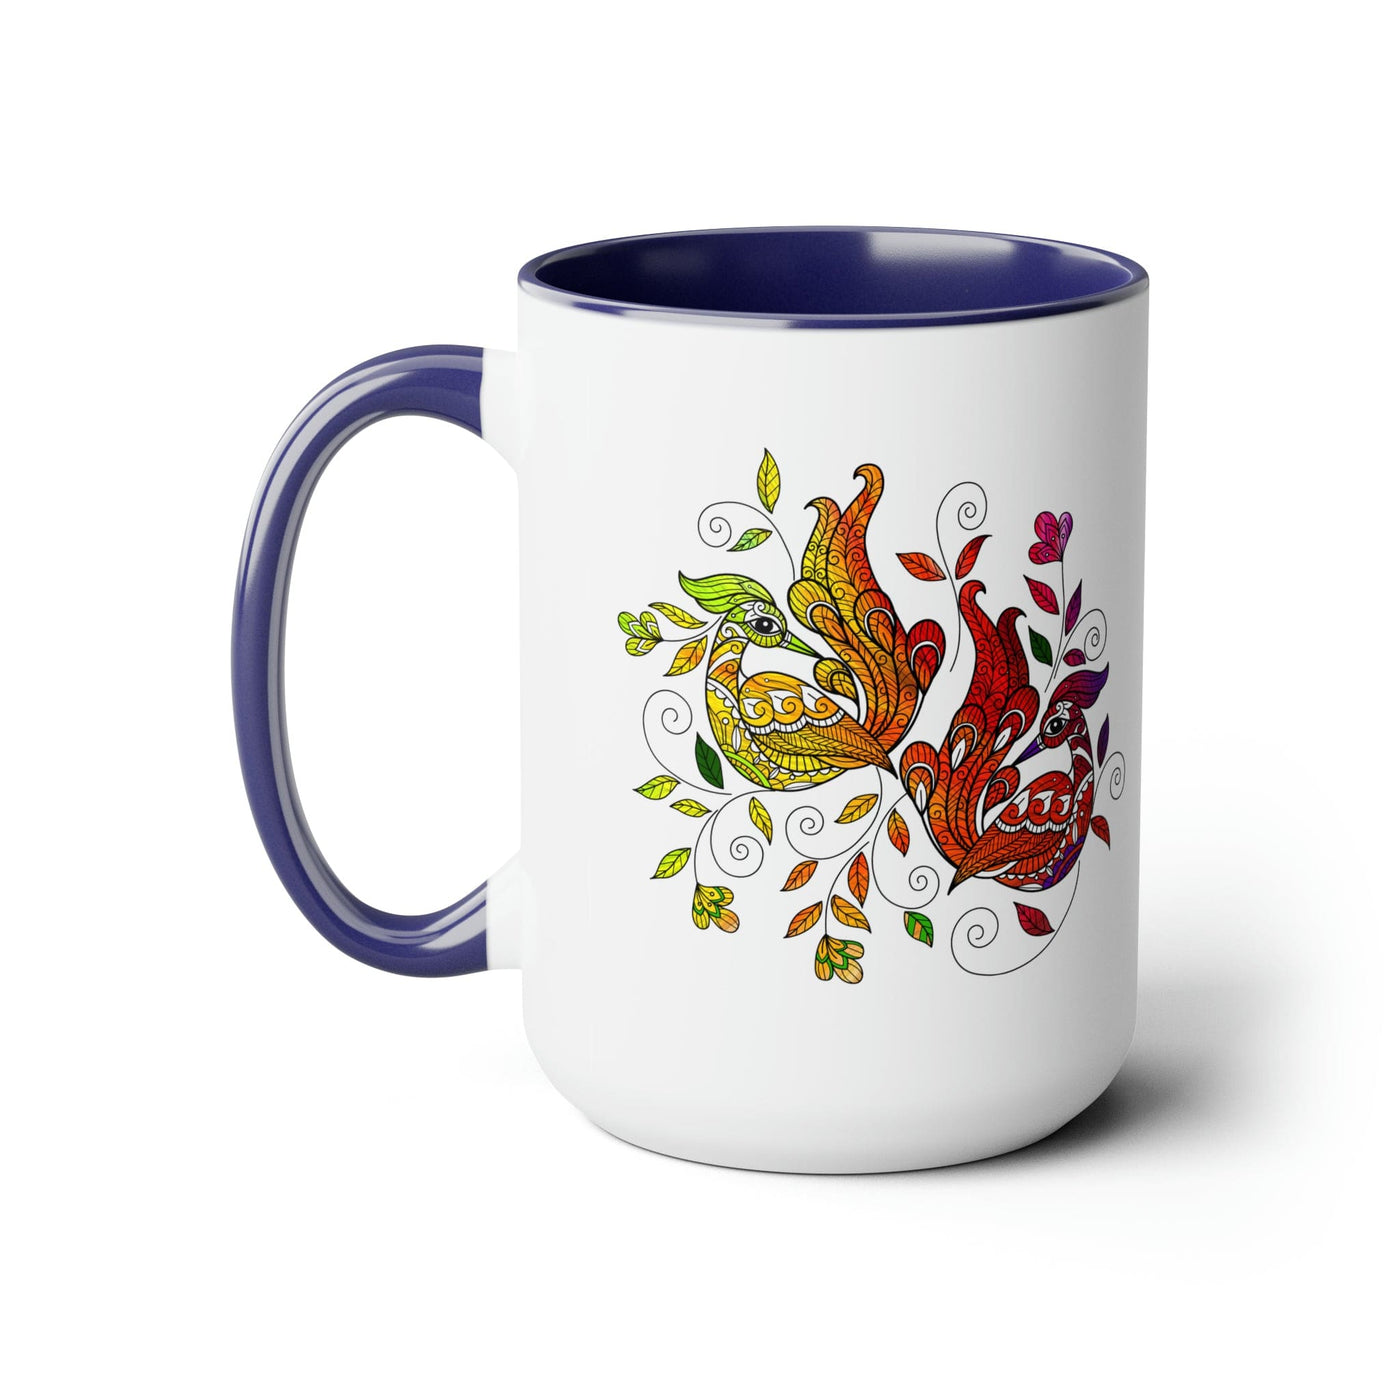 Accent Ceramic Mug 15oz i Shall Not Be Weary In Well Doing Wild Peacock Print